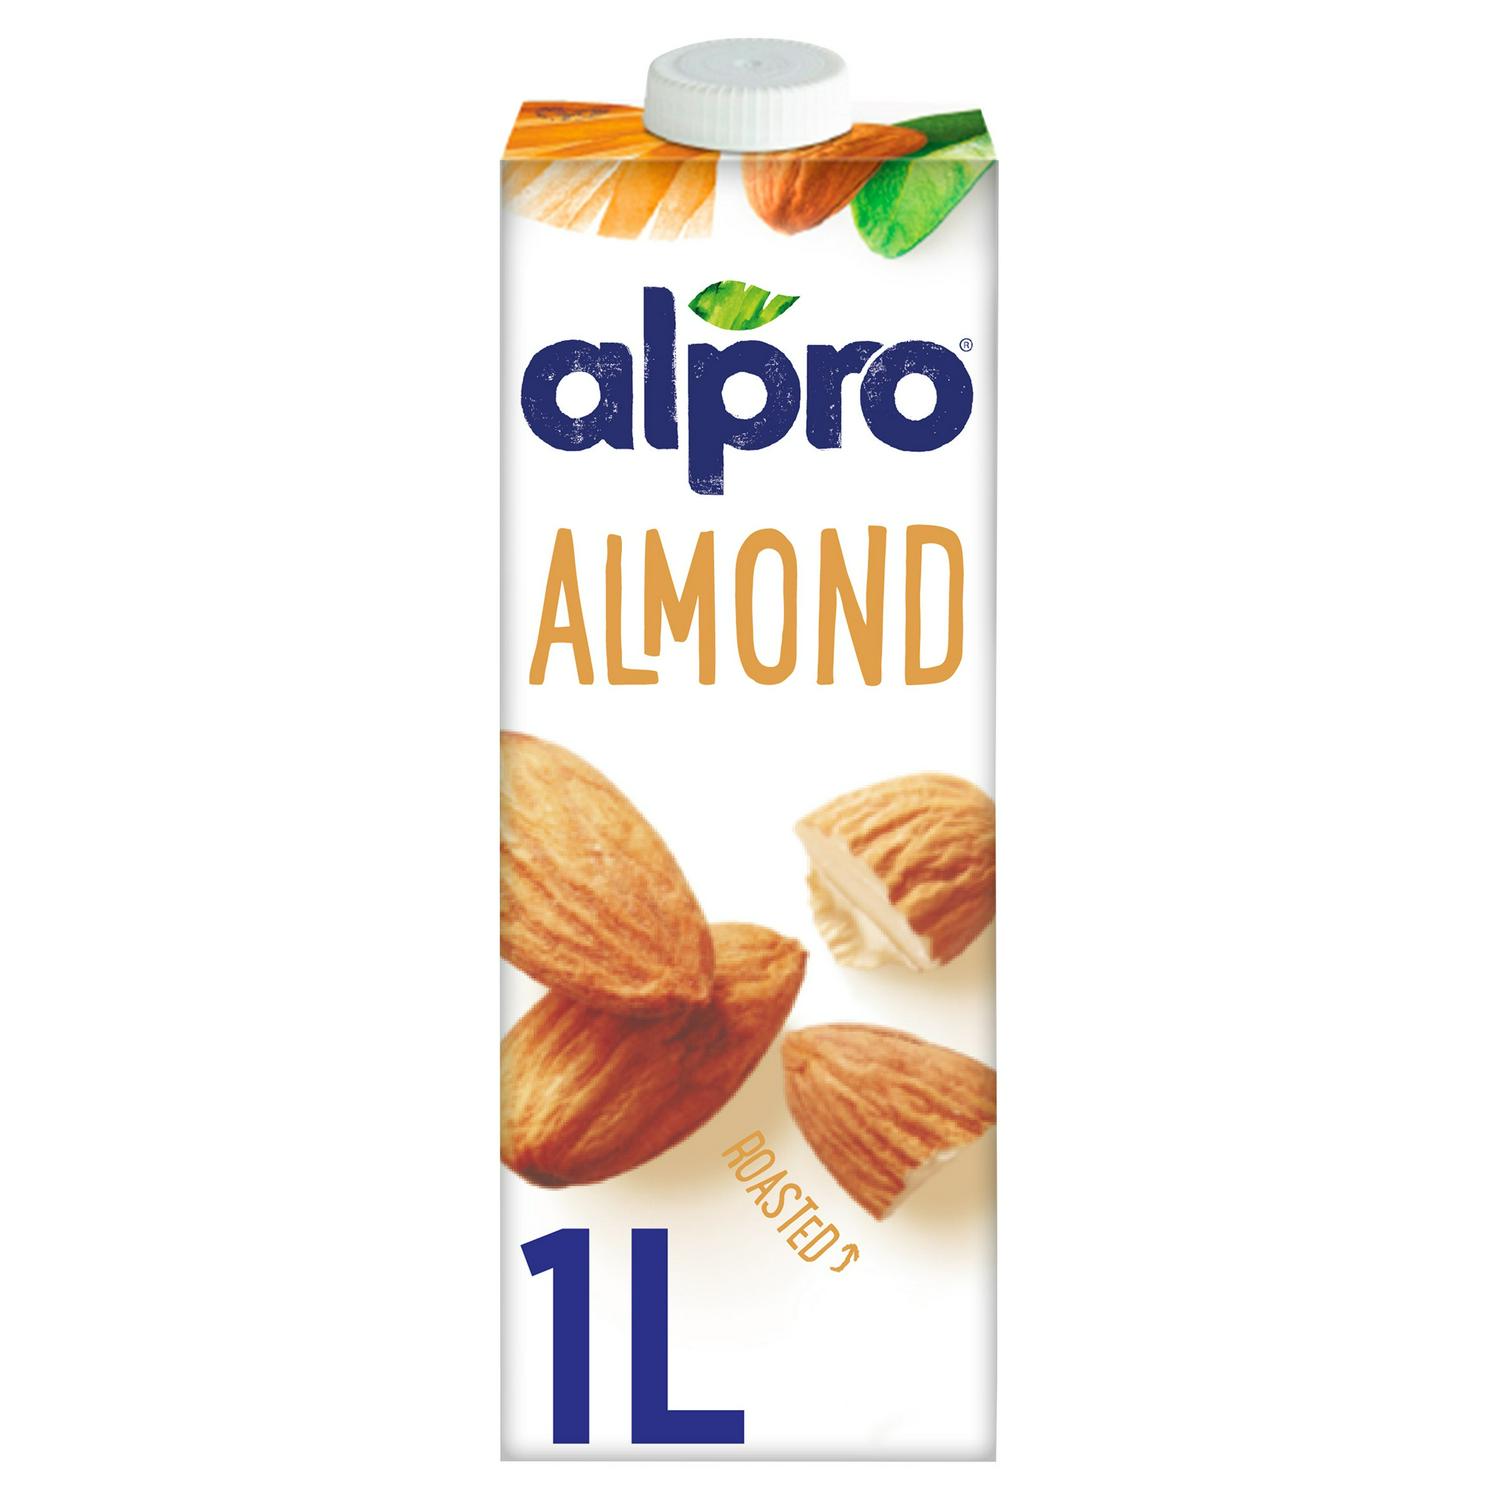 Alpro Almond Long Life Drink 1L (October 2023) RRP 1.95 CLEARANCE XL 99p or 2 for 1.50